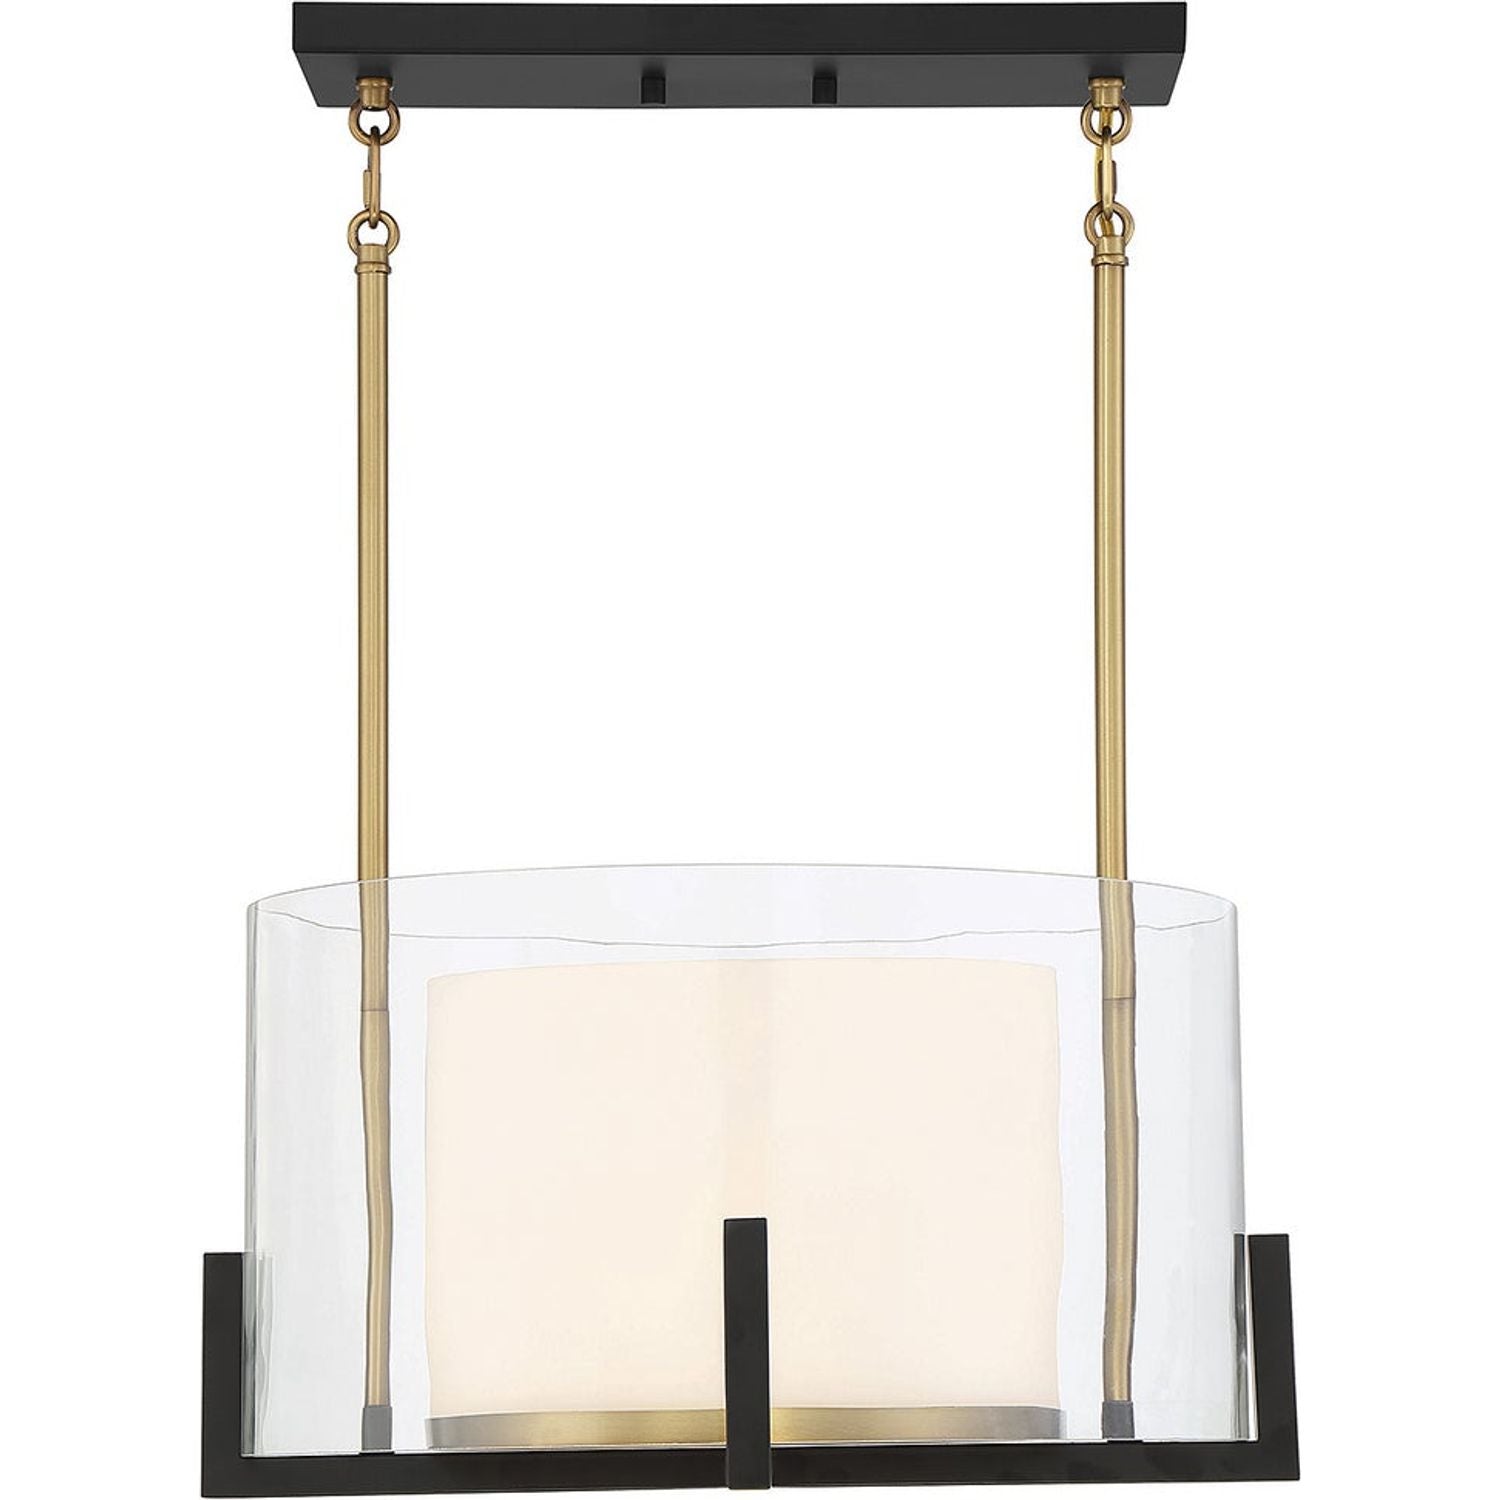 Savoy House - 7-1983-1-143 - One Light Pendant - Eaton - Matte Black with Warm Brass Accents